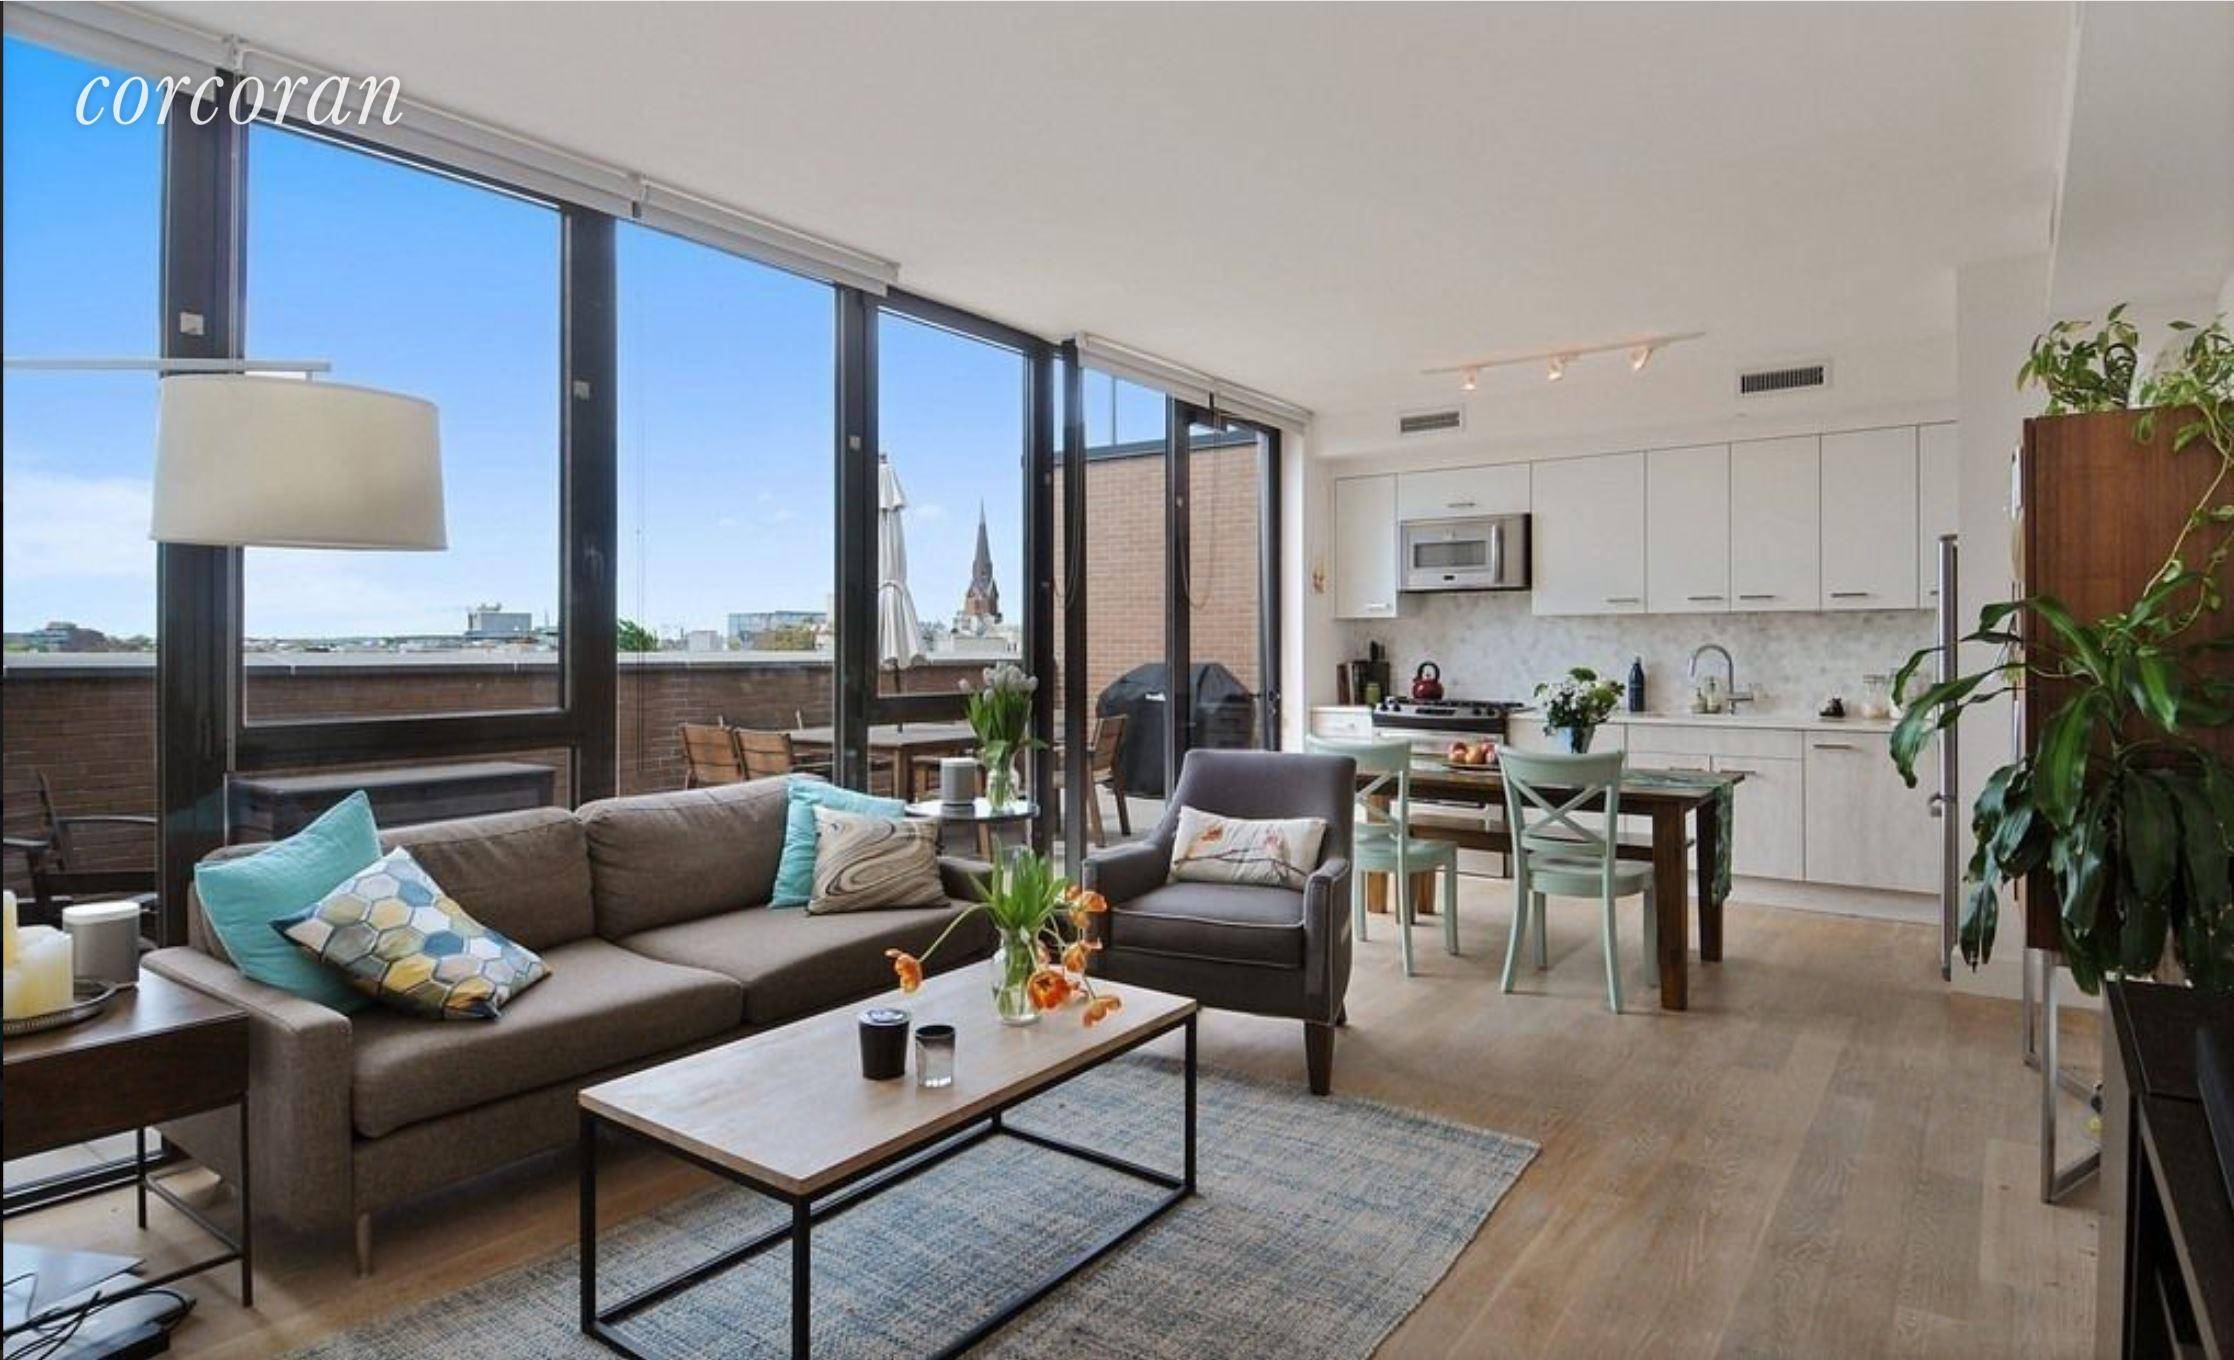 2 MONTH FREE RENT ON PENTHOUSE A 7, 500 Gross Gracious Penthouse layout features wide plank solid white oak floors, Central AC Heat, stainless steel appliances with paneled dishwasher, custom ...